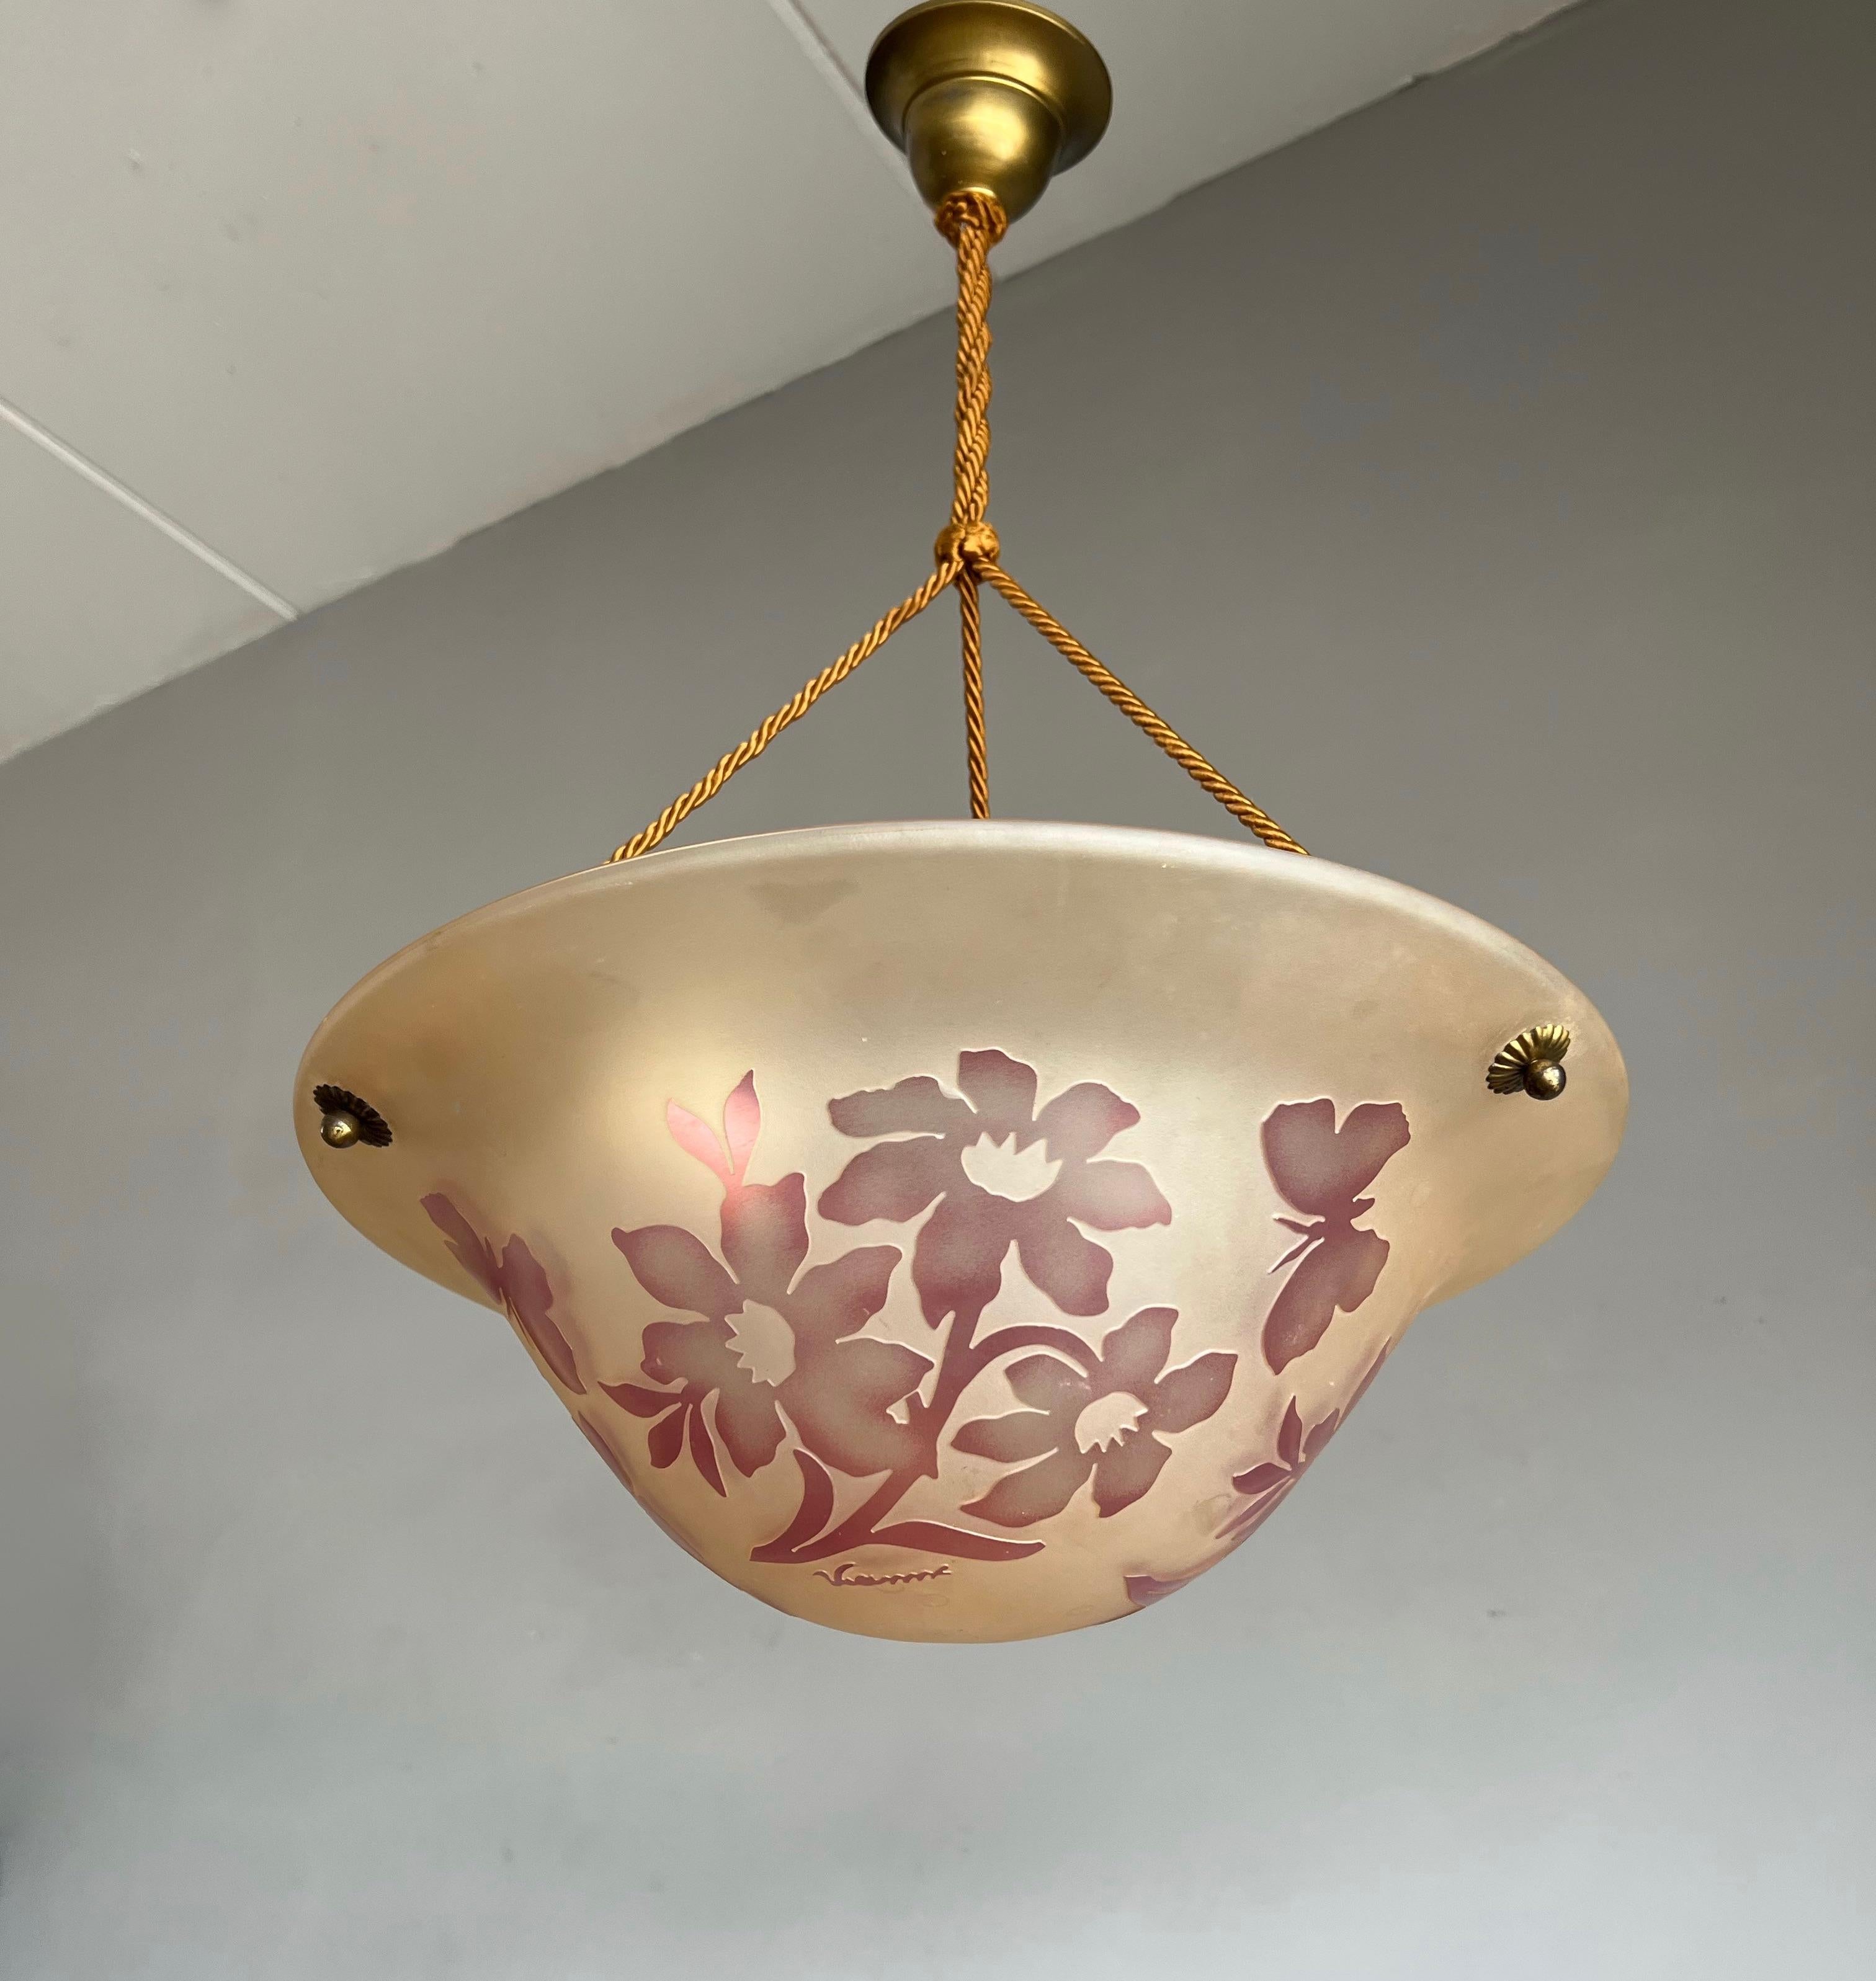 Unique and stunning work of lighting art.

If you are passionate about early 20th century decorative art then you will love this very rare (or possibly unique) art glass light fixture. What you are seeing here is an extremely rare, acid etched